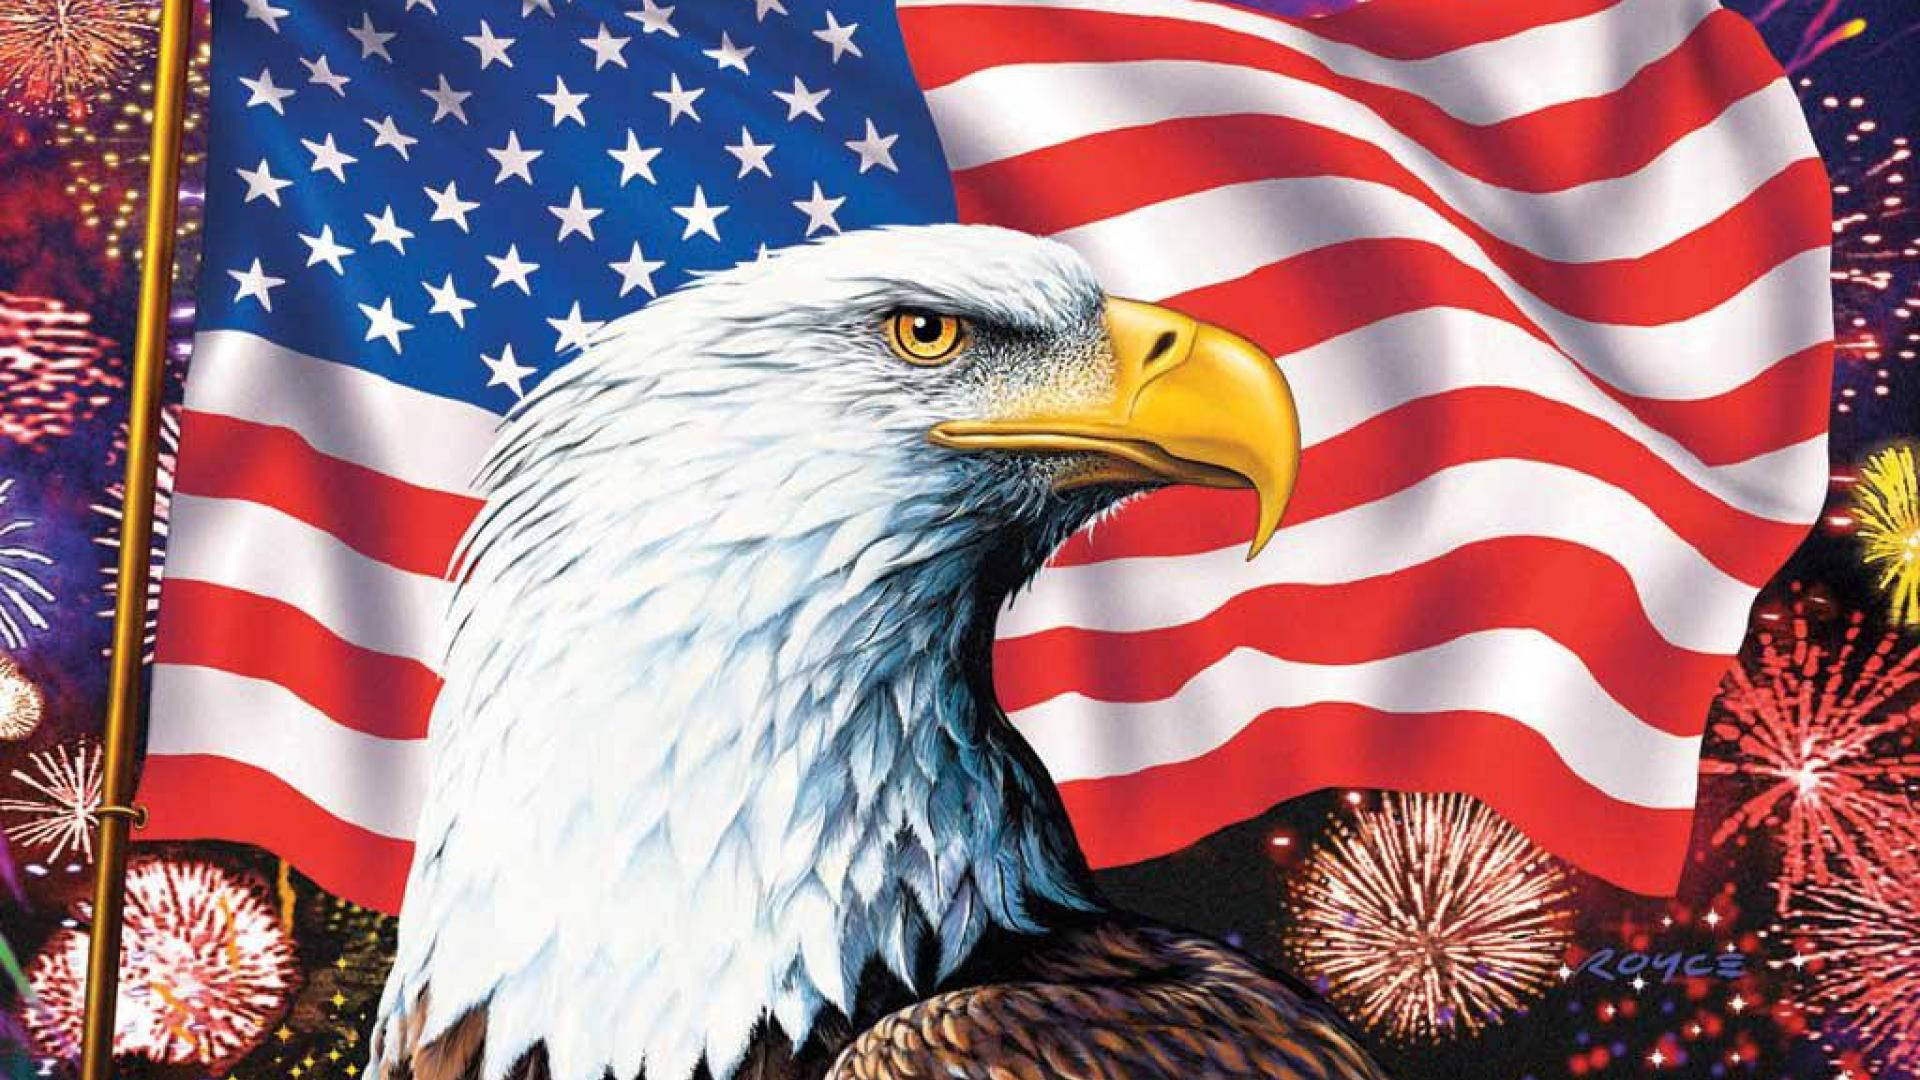 Eagle And The American Flag Wallpaper